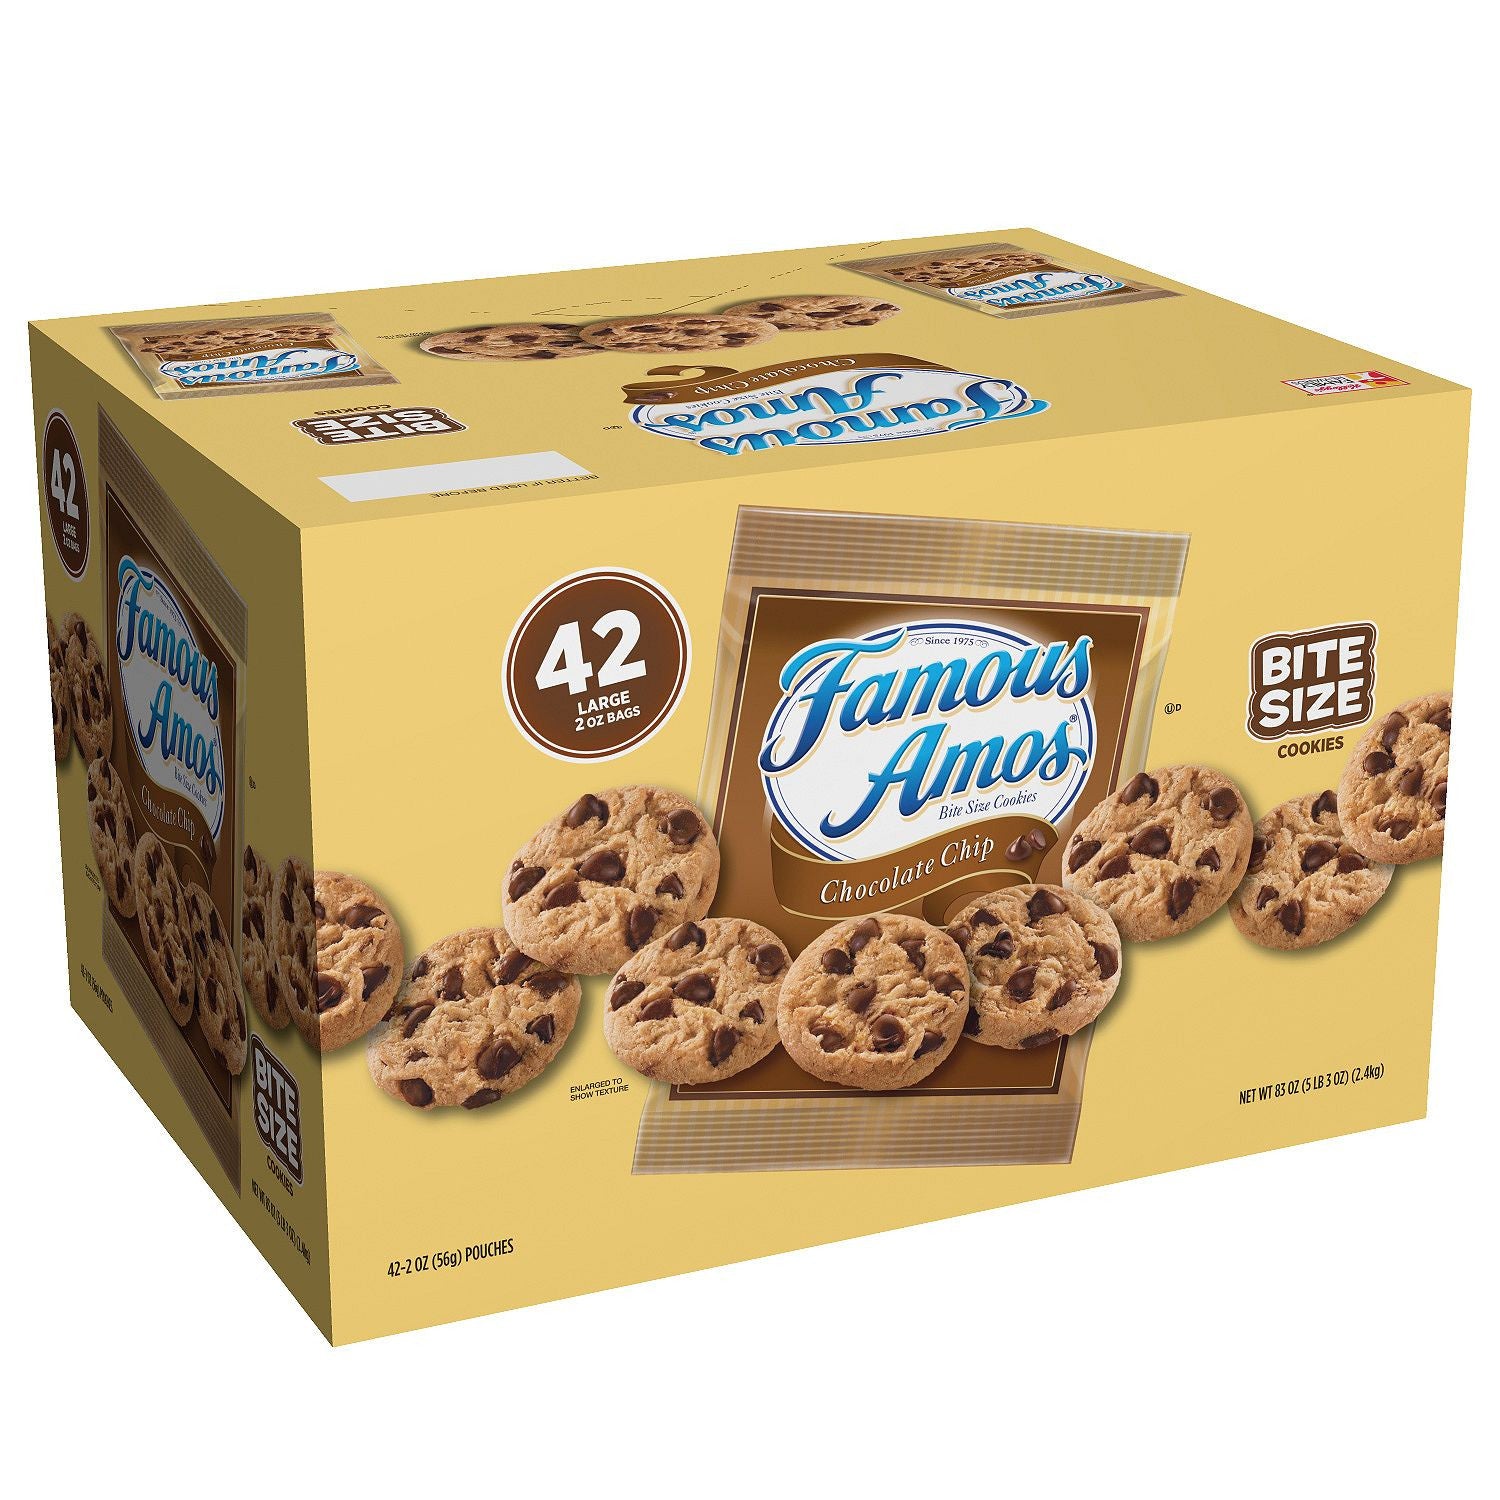 Chips Ahoy Chocolate Chip Cookies Family Size, 3 pk.